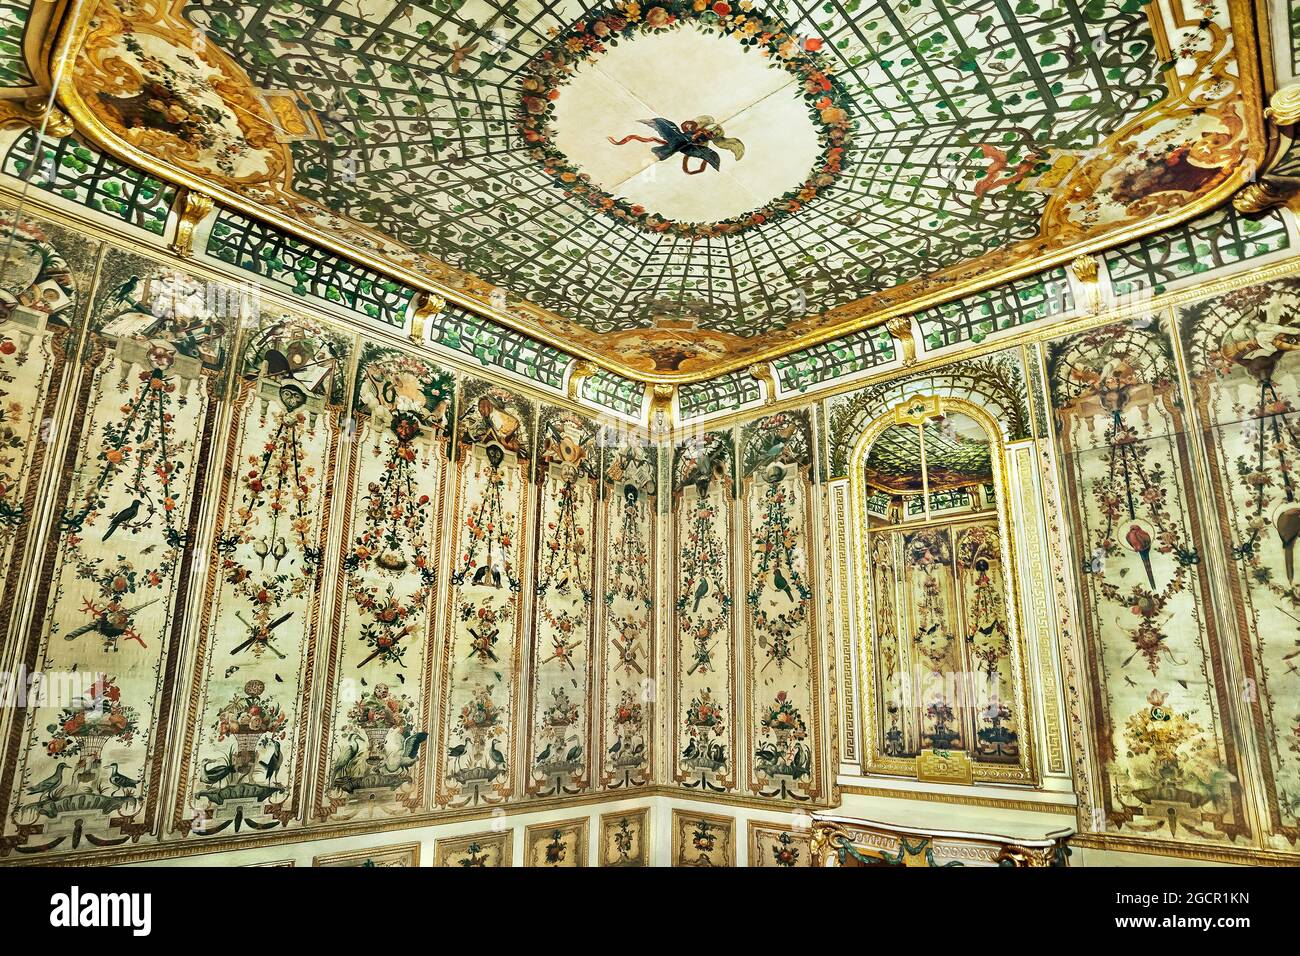 Cabinet of the Tattenbach family, ceiling and wall panelling of painted silk 1772-79, National Museum, Munich, Upper Bavaria, Bavaria, Germany Stock Photo